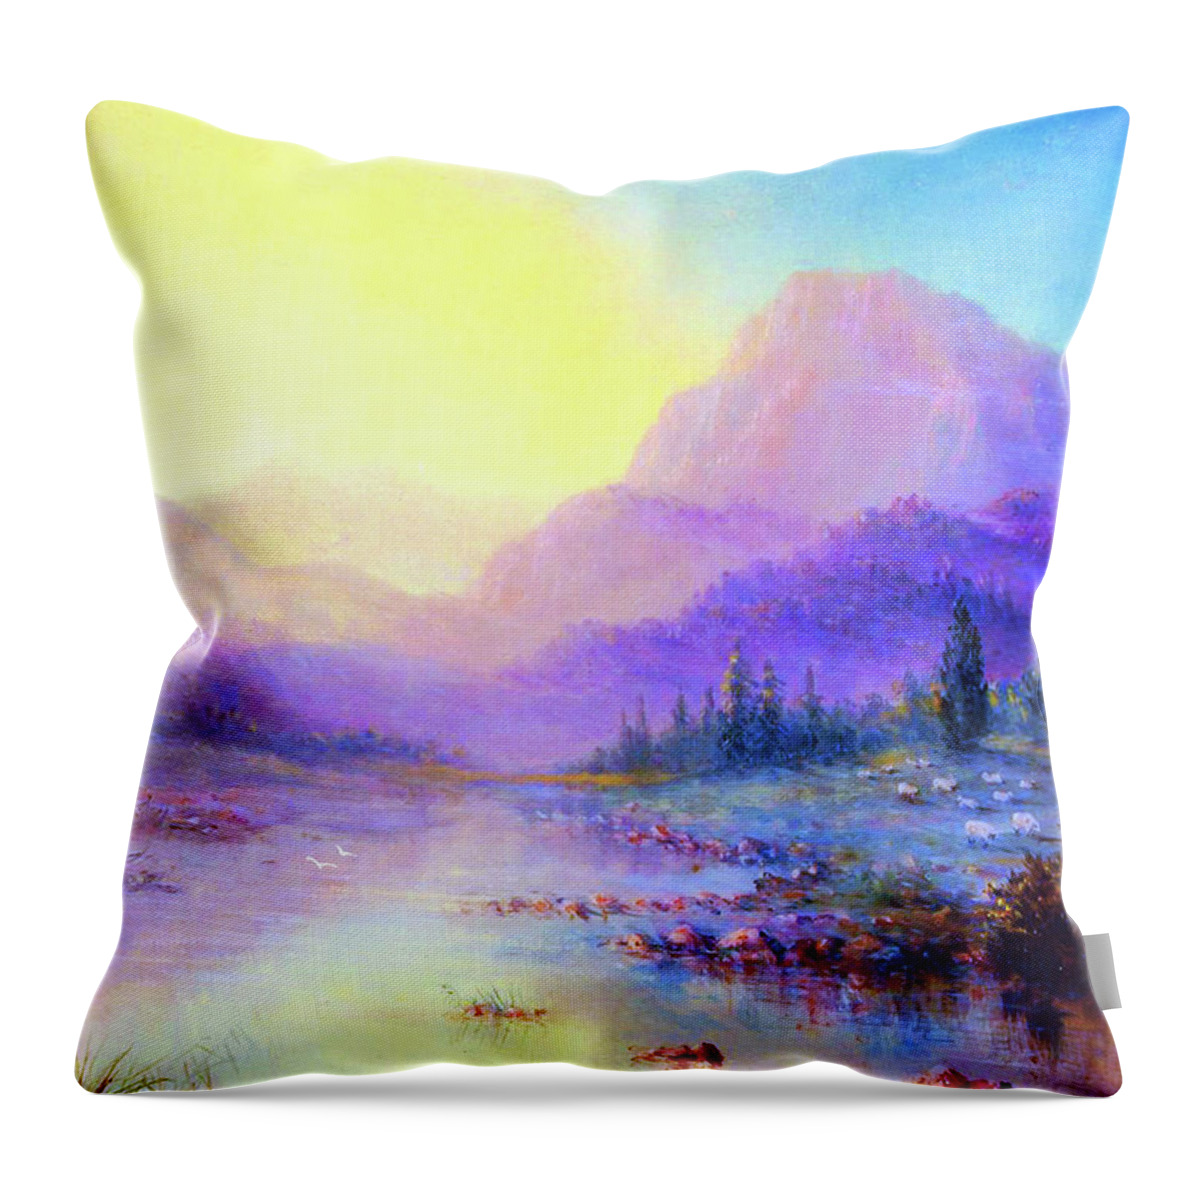 Landscape Throw Pillow featuring the painting Misty Mountain Melody by Jane Small